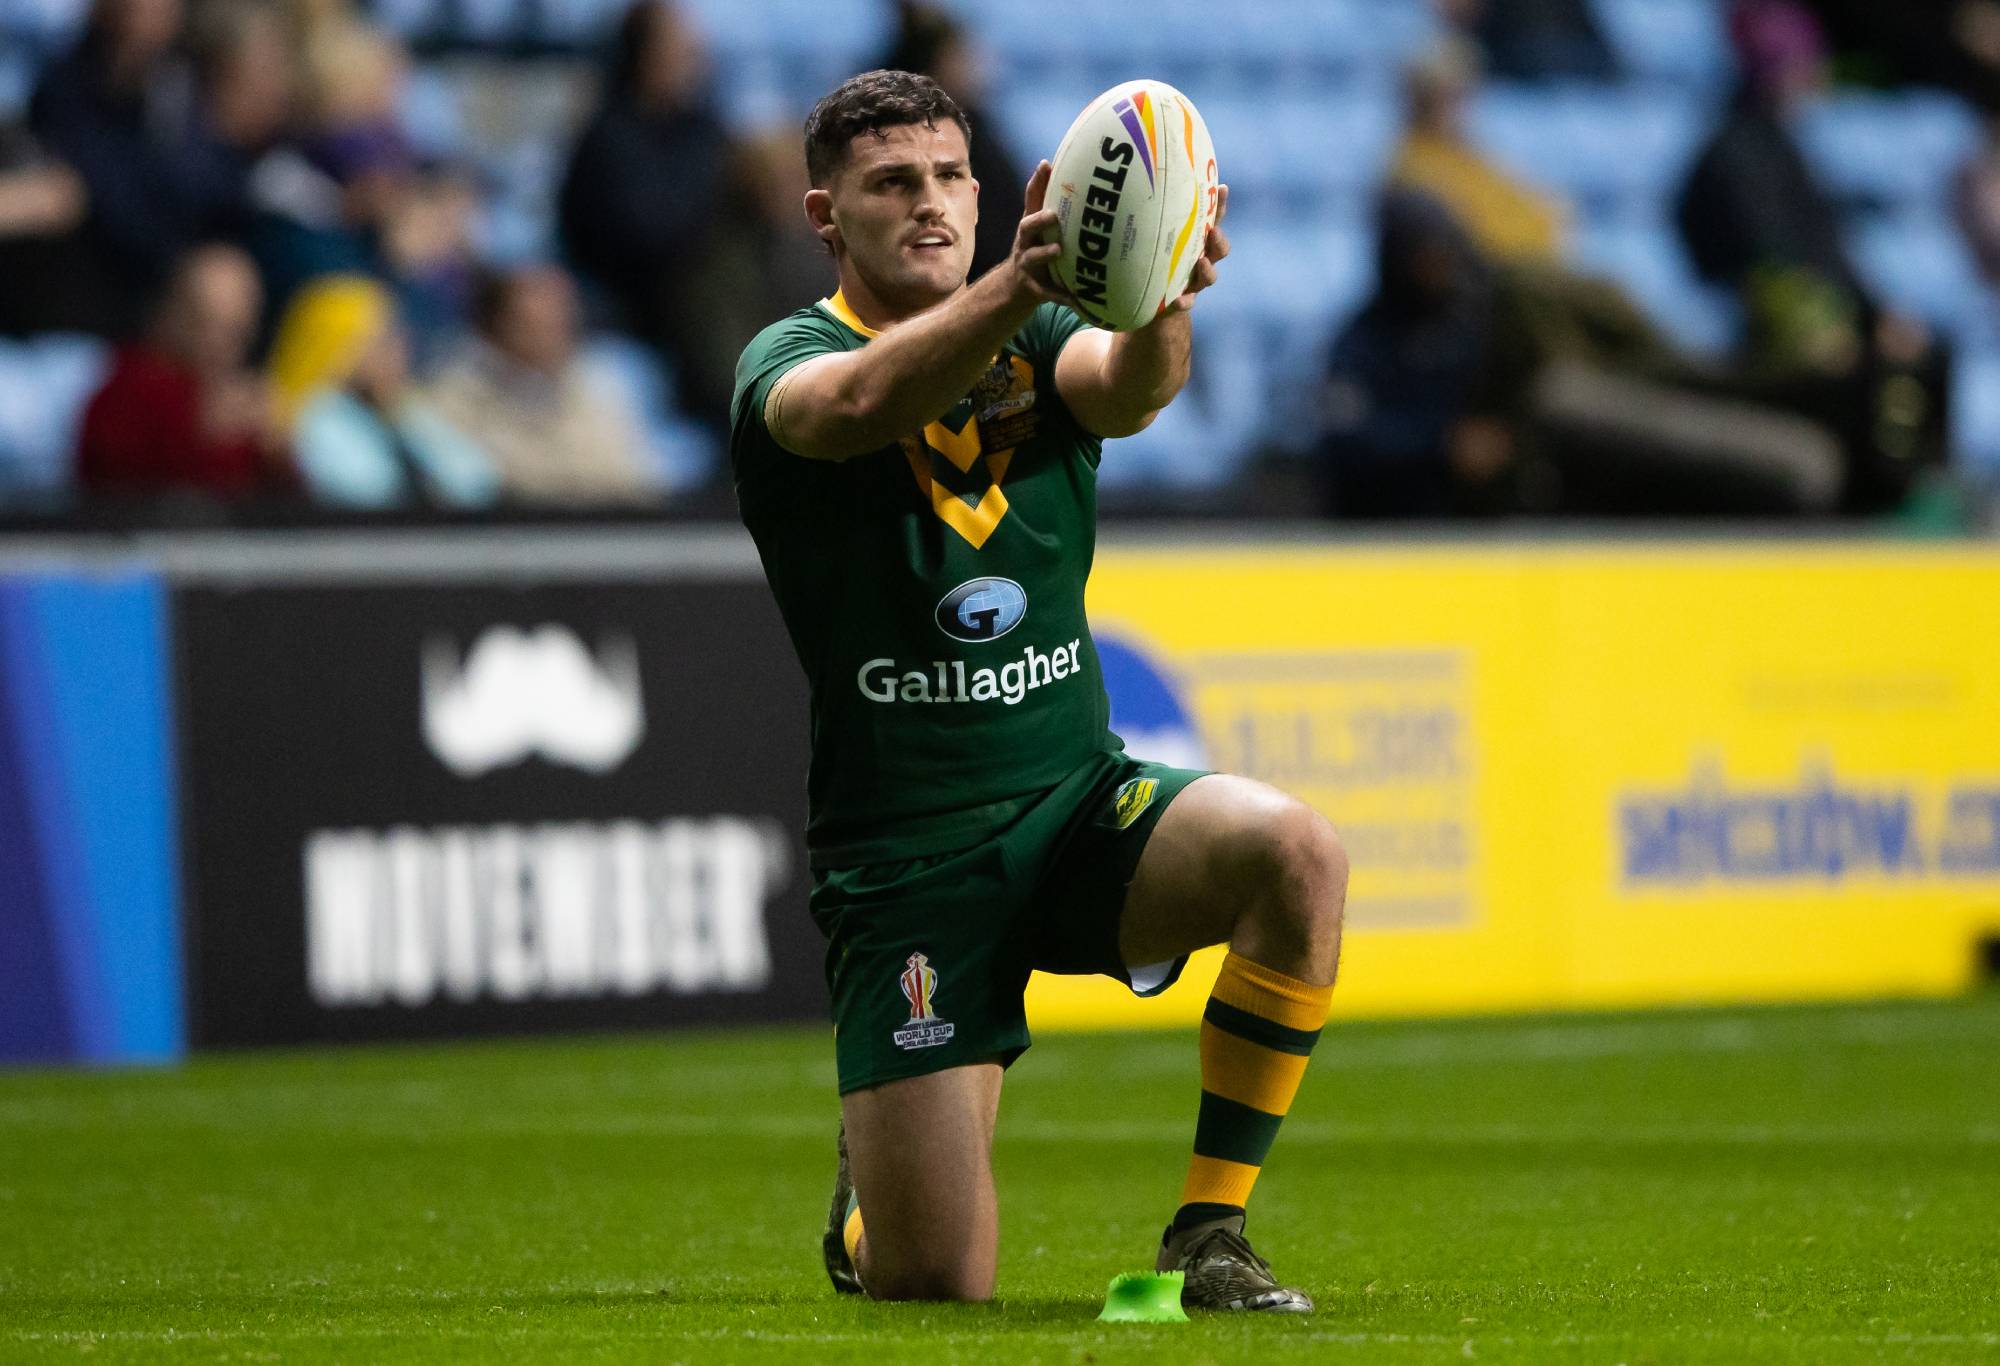 COVENTRY, ENGLAND - OCTOBER 21: Nathan Cleary of Australia during Rugby League World Cup 2021 Pool B match between Australia and Scotland at The Coventry Building Society Arena on October 21, 2022 in Coventry, England. (Photo by James Gill - Danehouse/Getty Images)